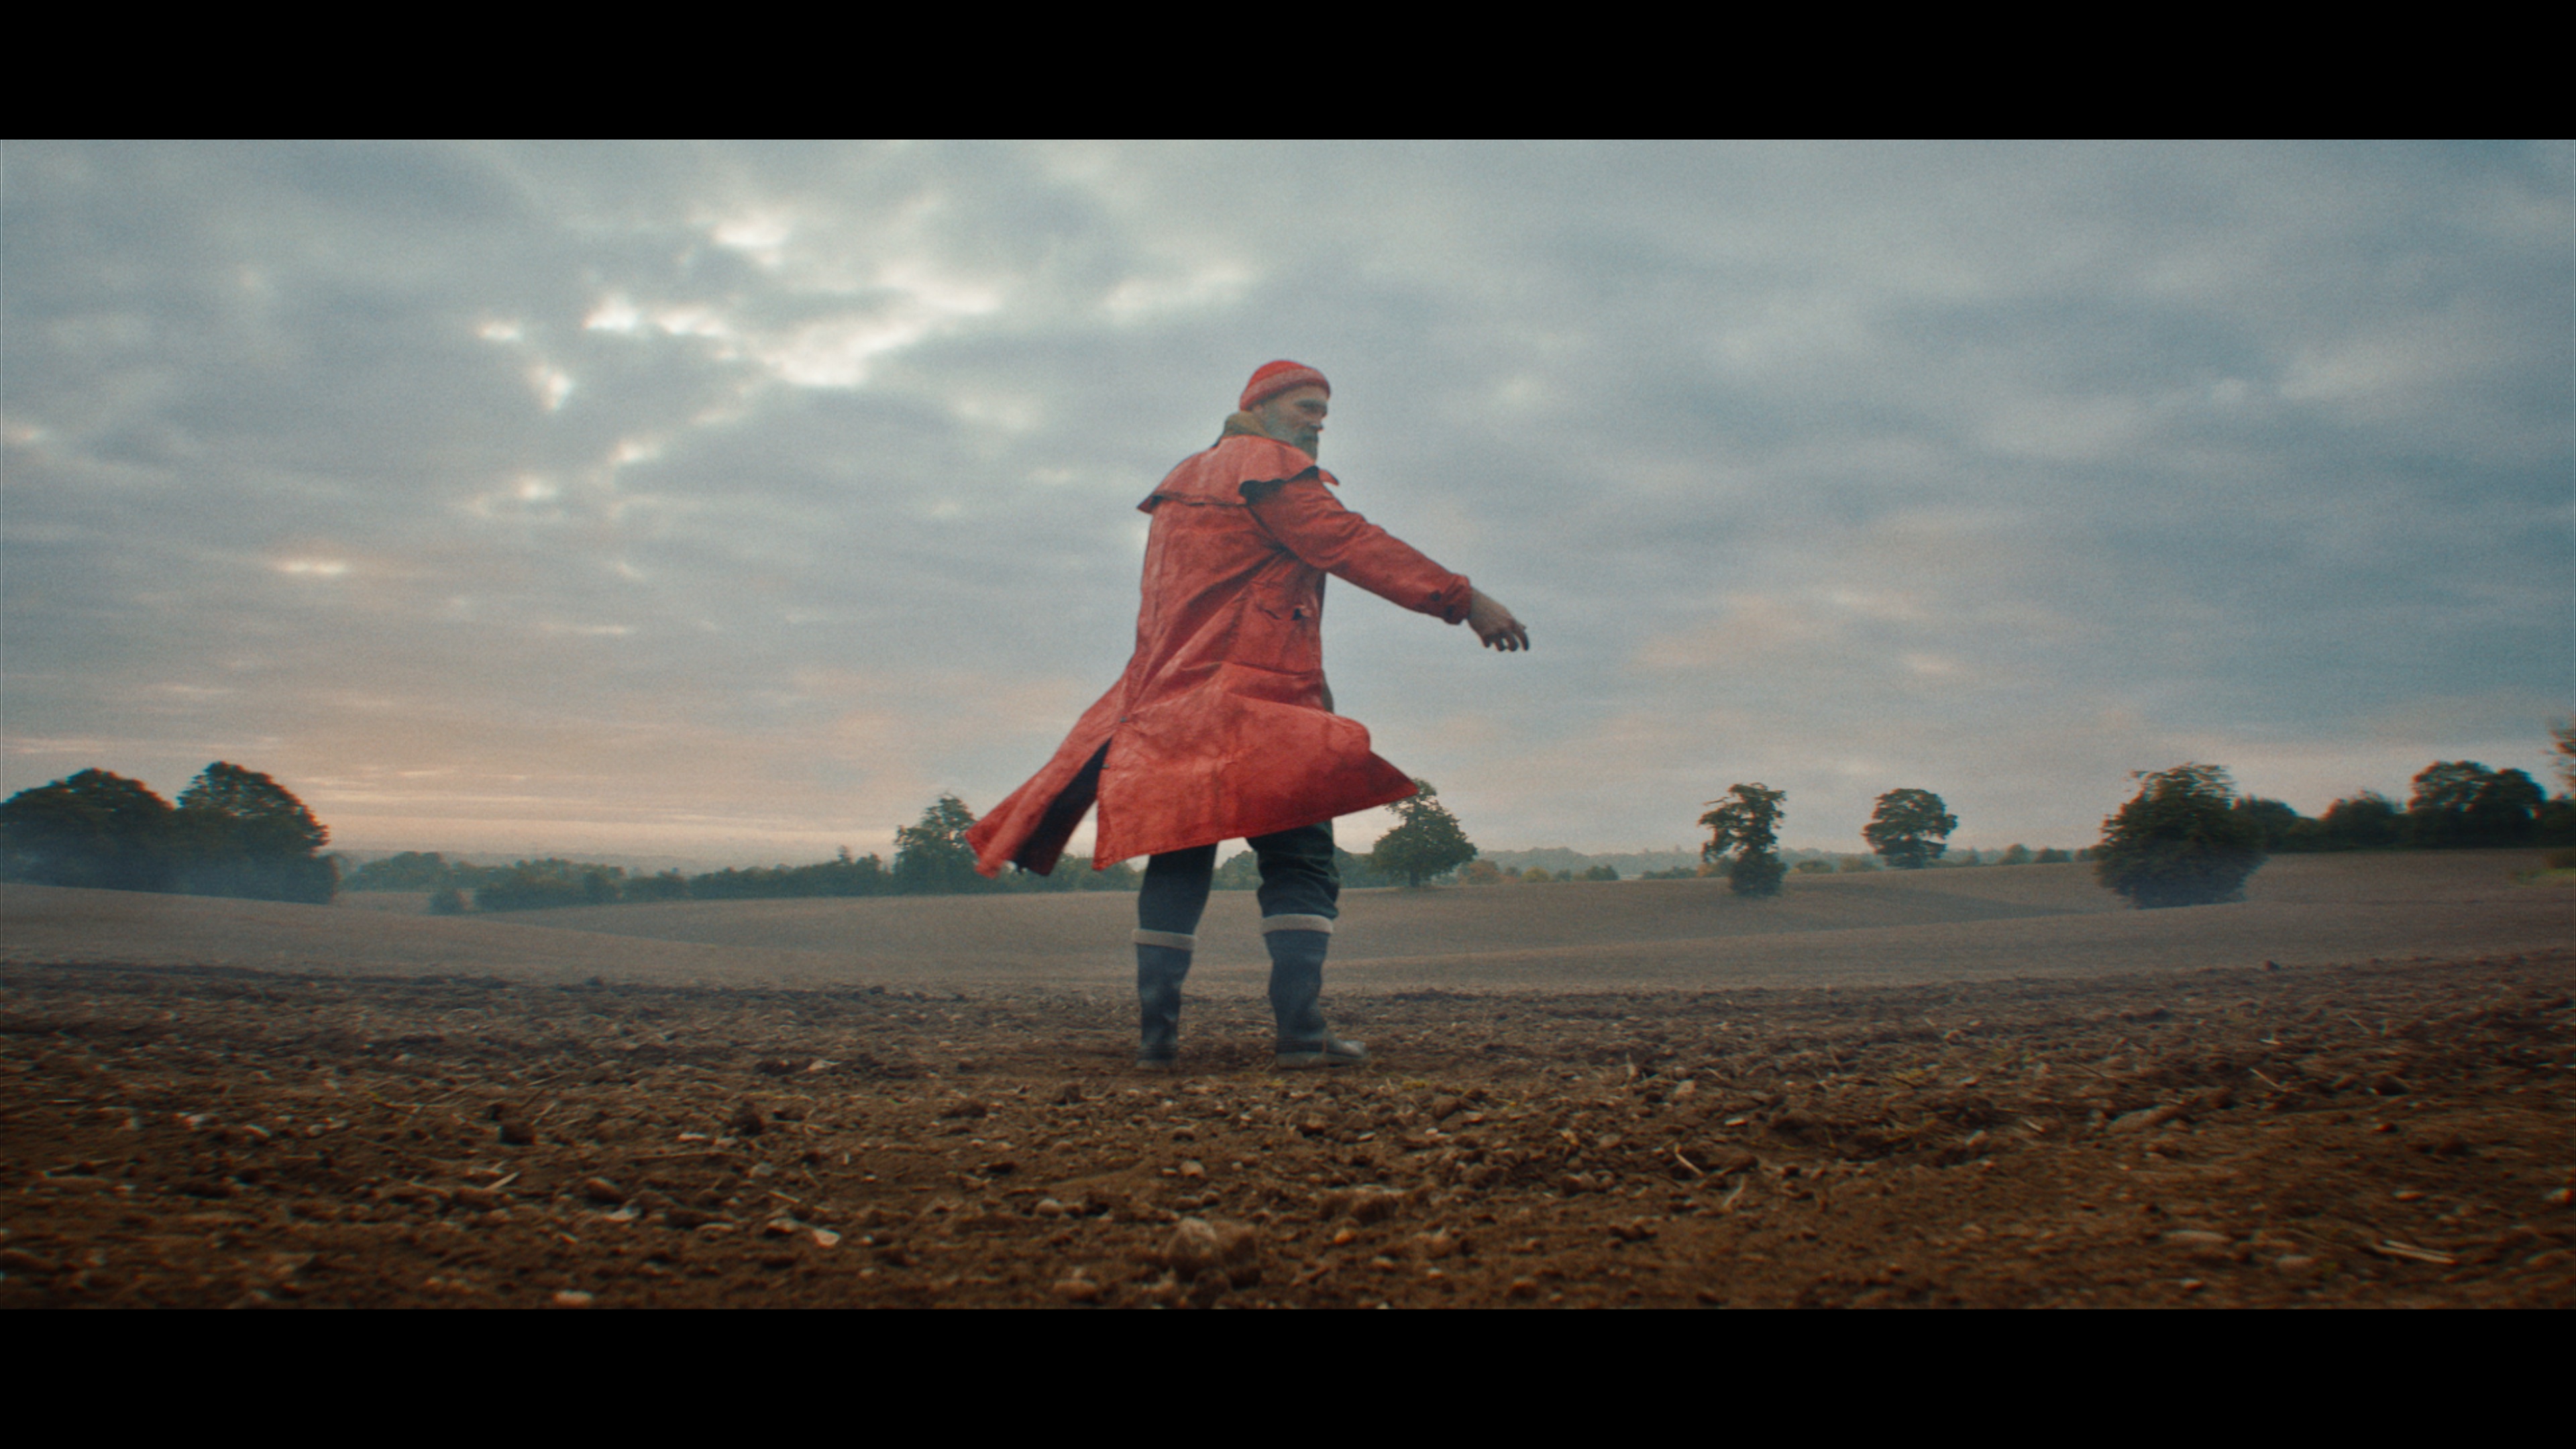 Morrisons introduces Farmer Christmas as it pays tribute to the helpers and heroes who make Christmas happen